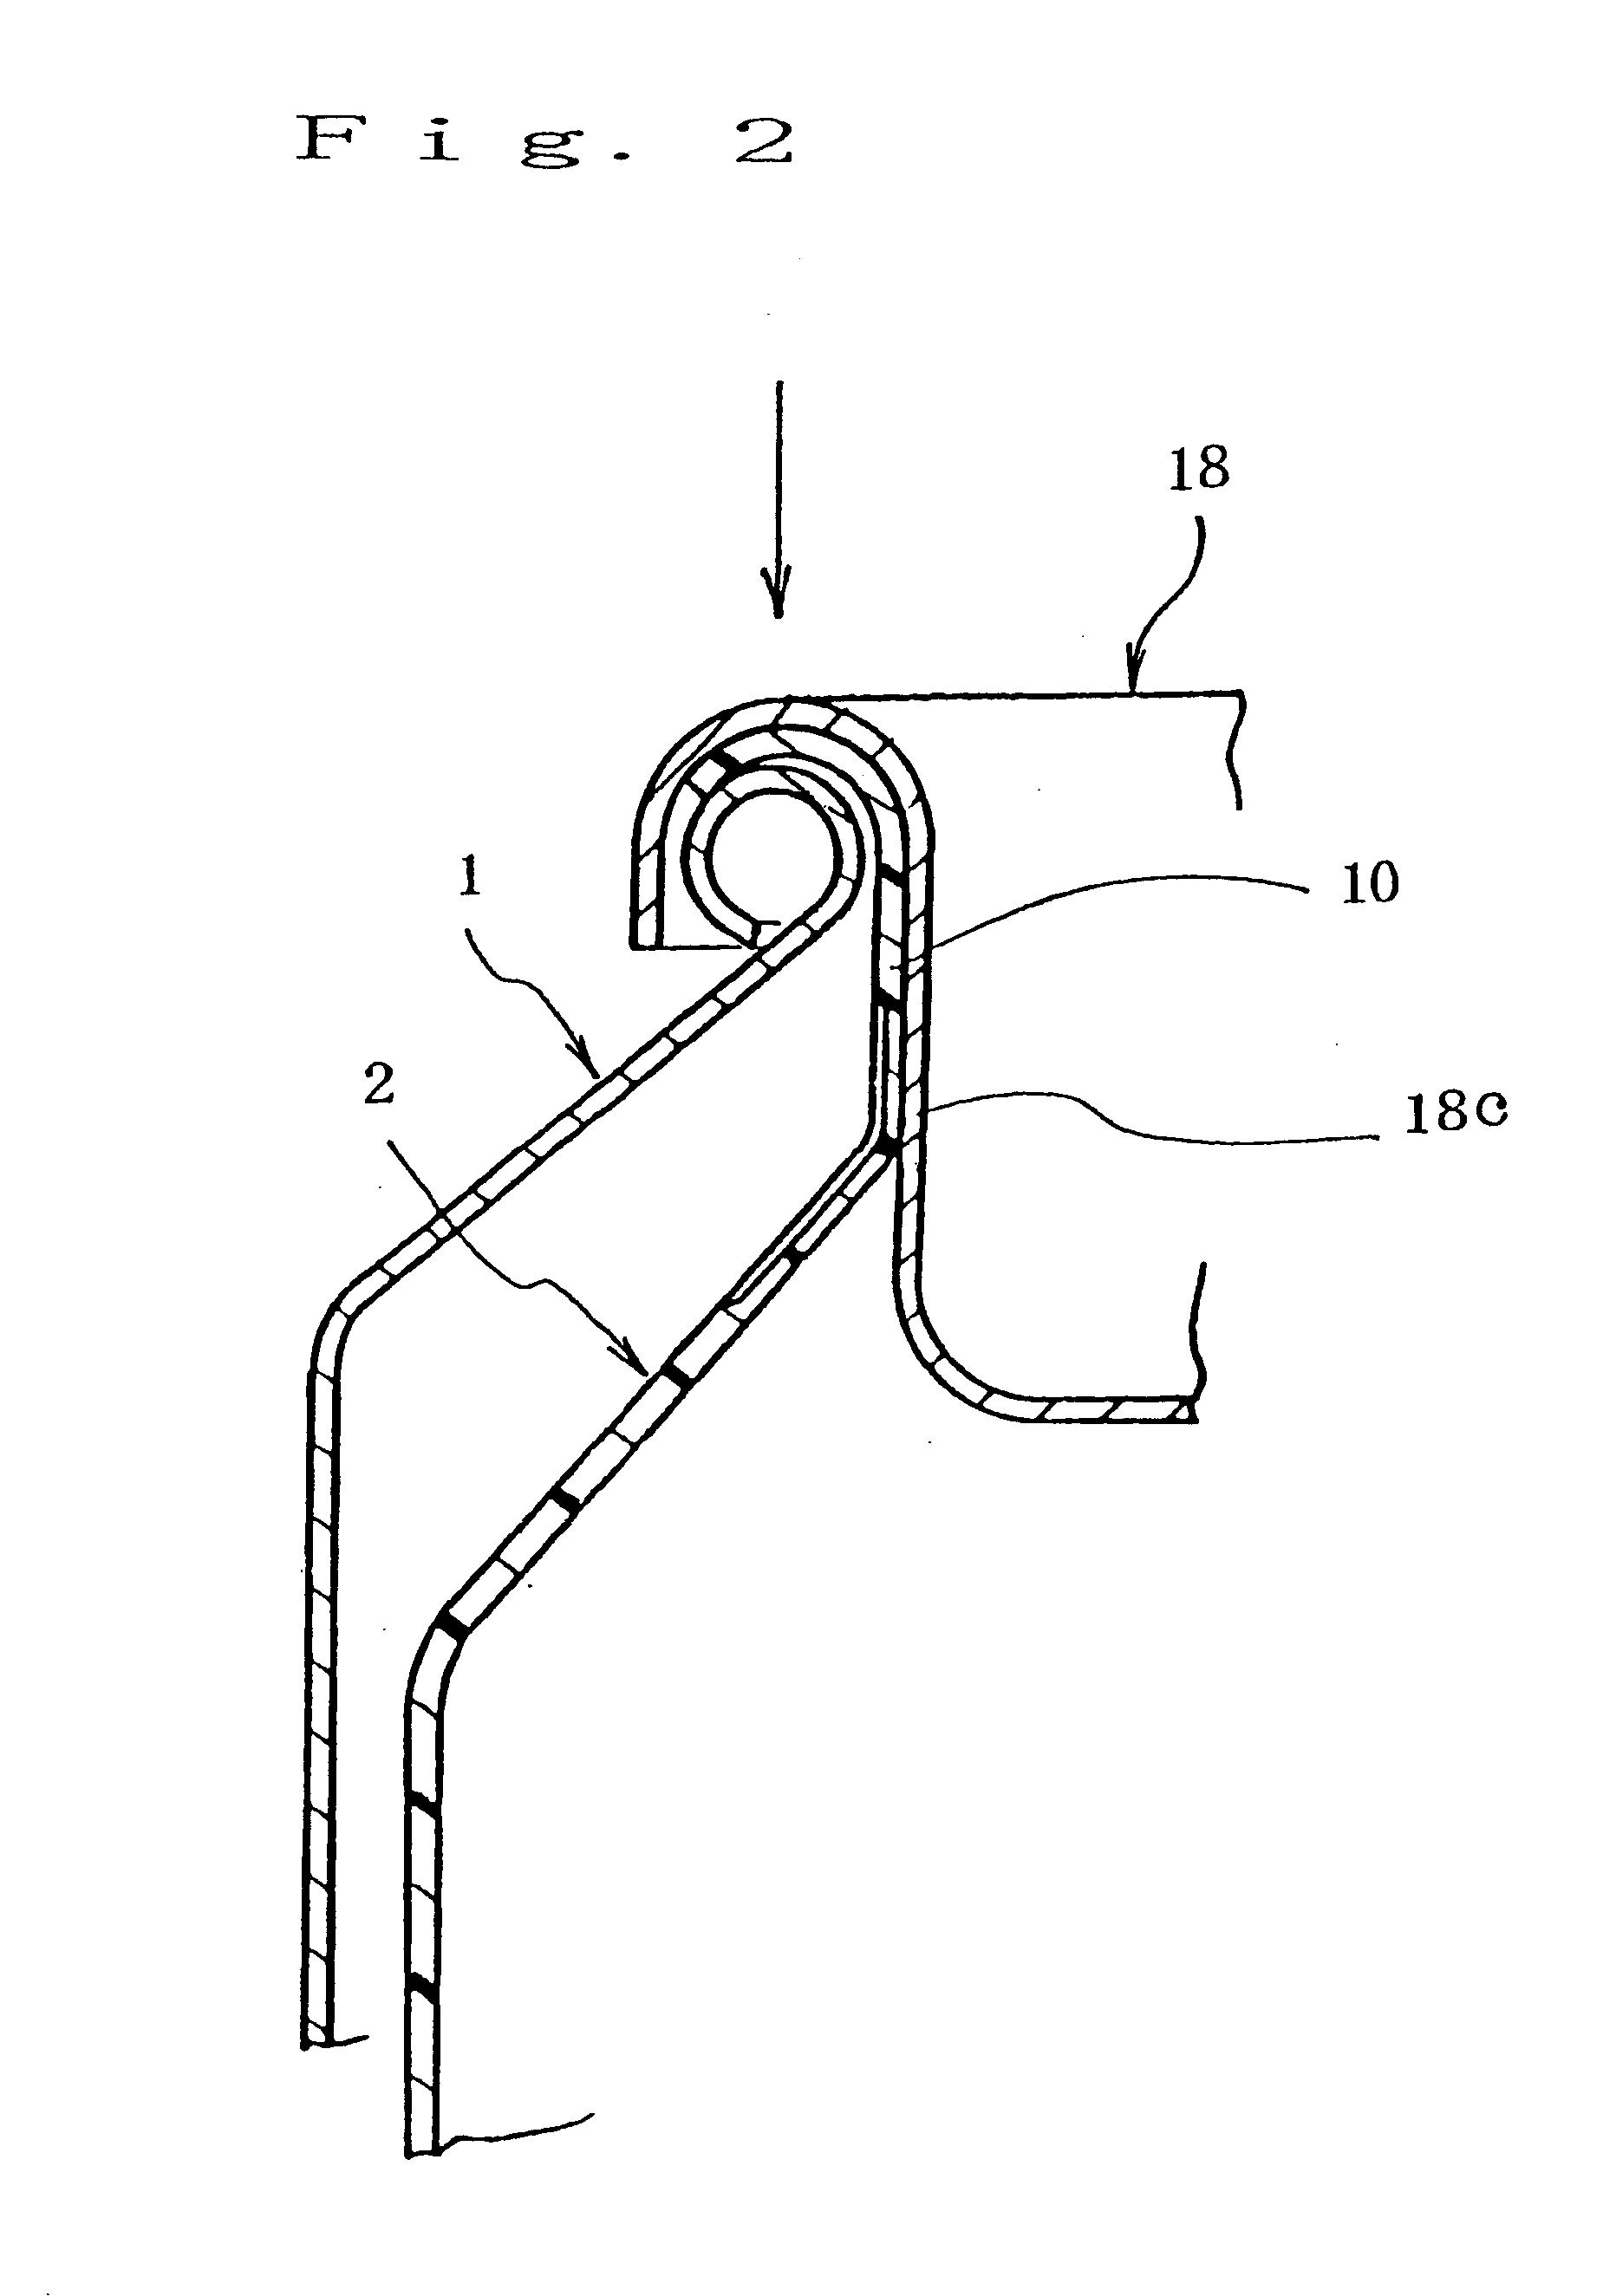 Double pressurized container for charging undercup and double pressurized products using the container